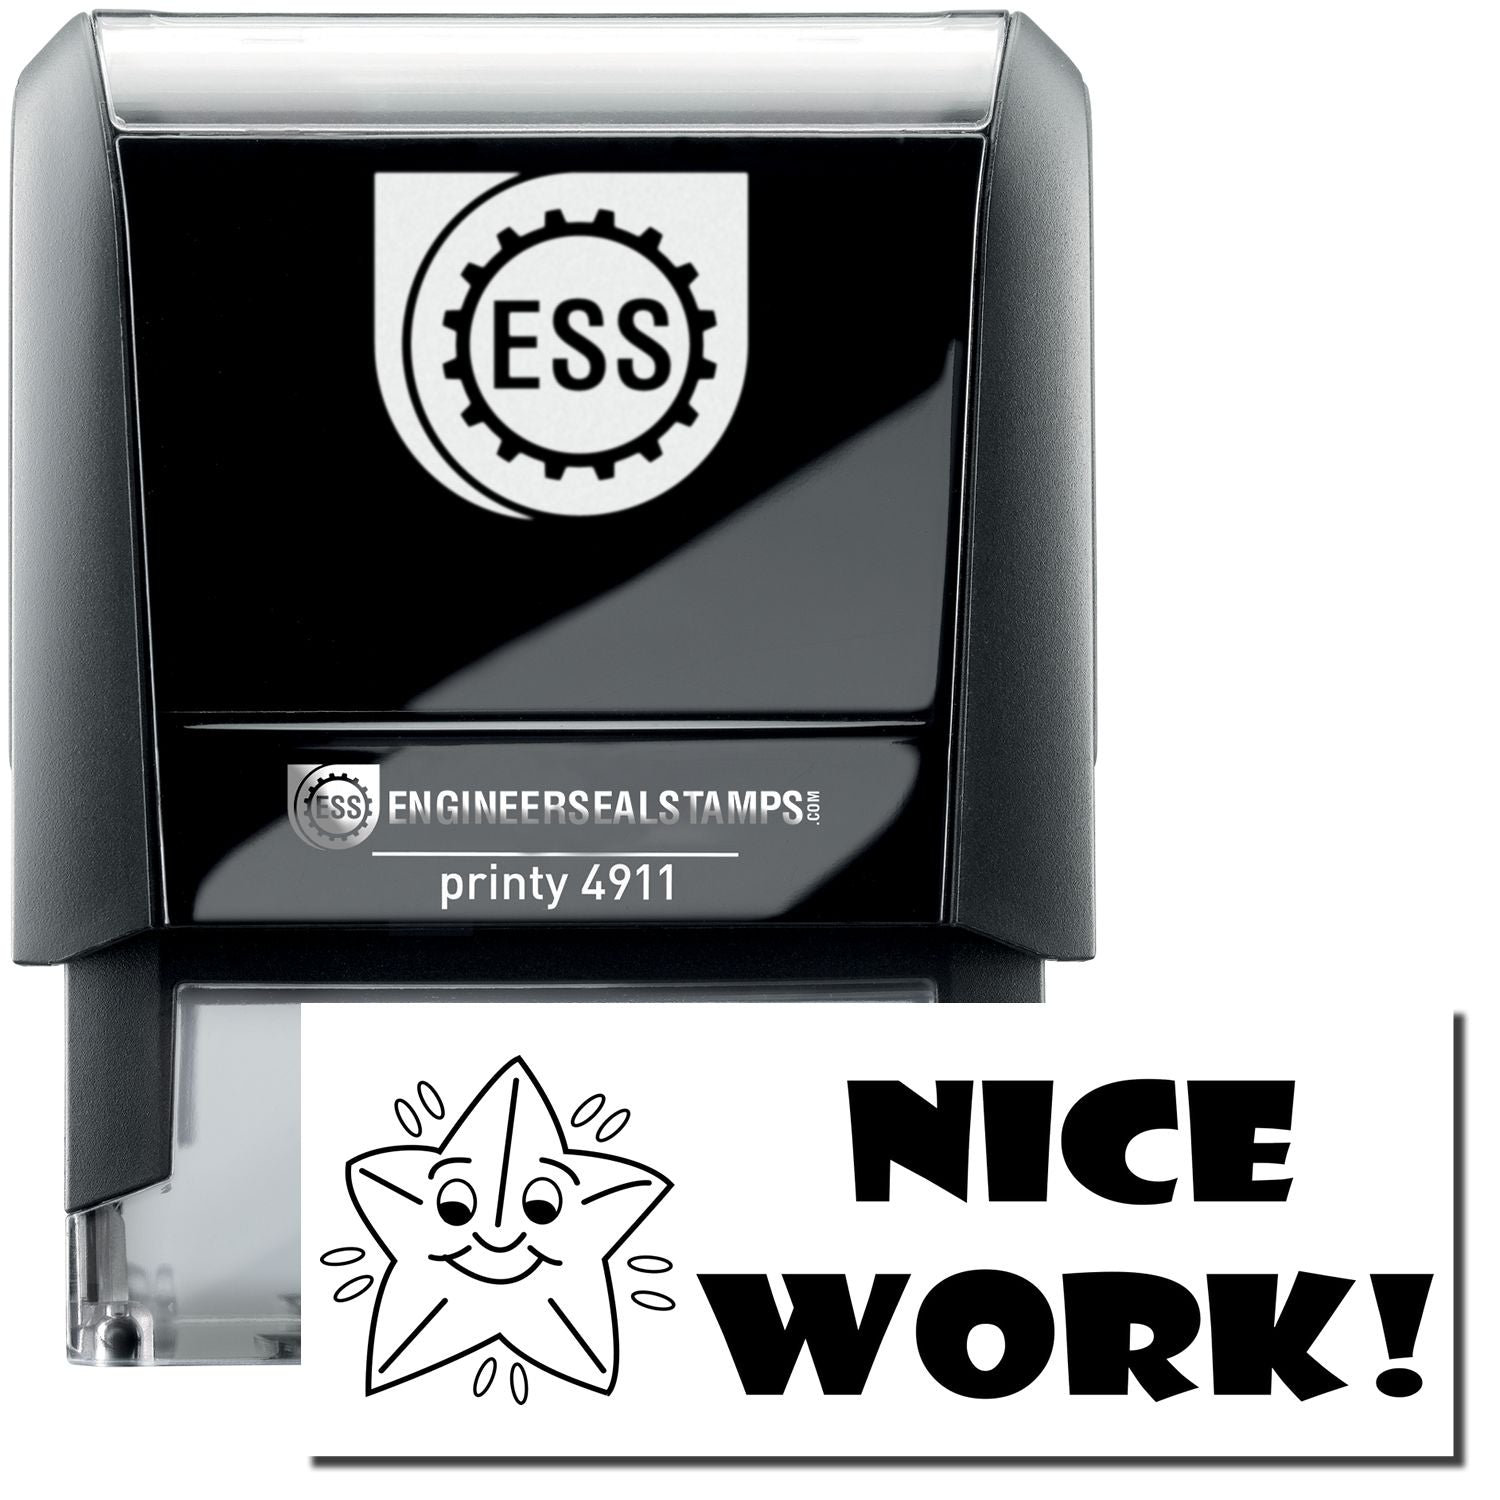 A self-inking stamp with a stamped image showing how the text "Nice Work!" in a bold font with an image of a starfish with a smile on the left side is displayed after stamping.